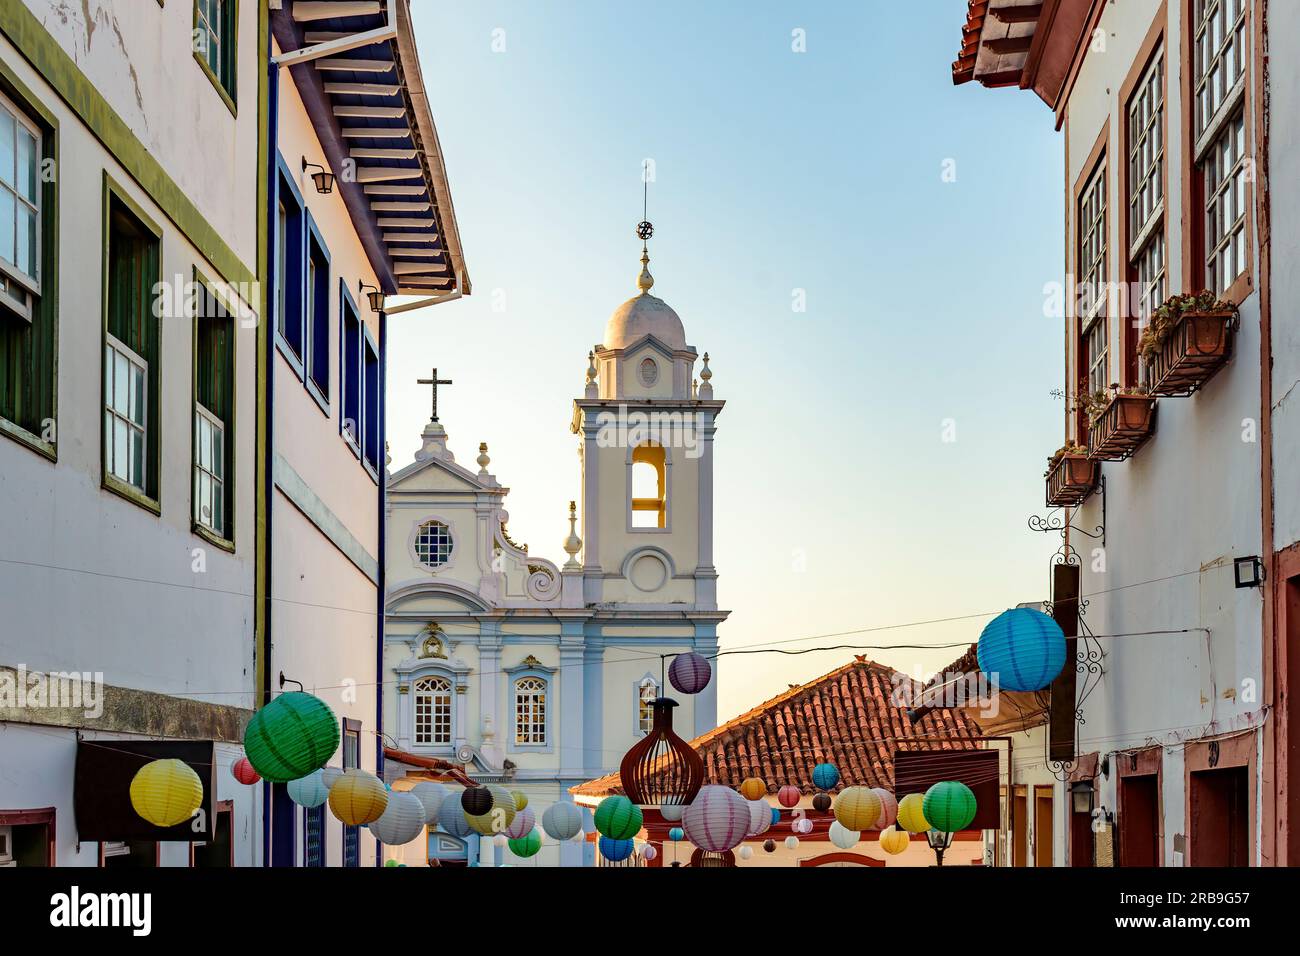 Houses and church in the streets of the city of Diamantina decorated with colorful lanterns and light fixtures Stock Photo